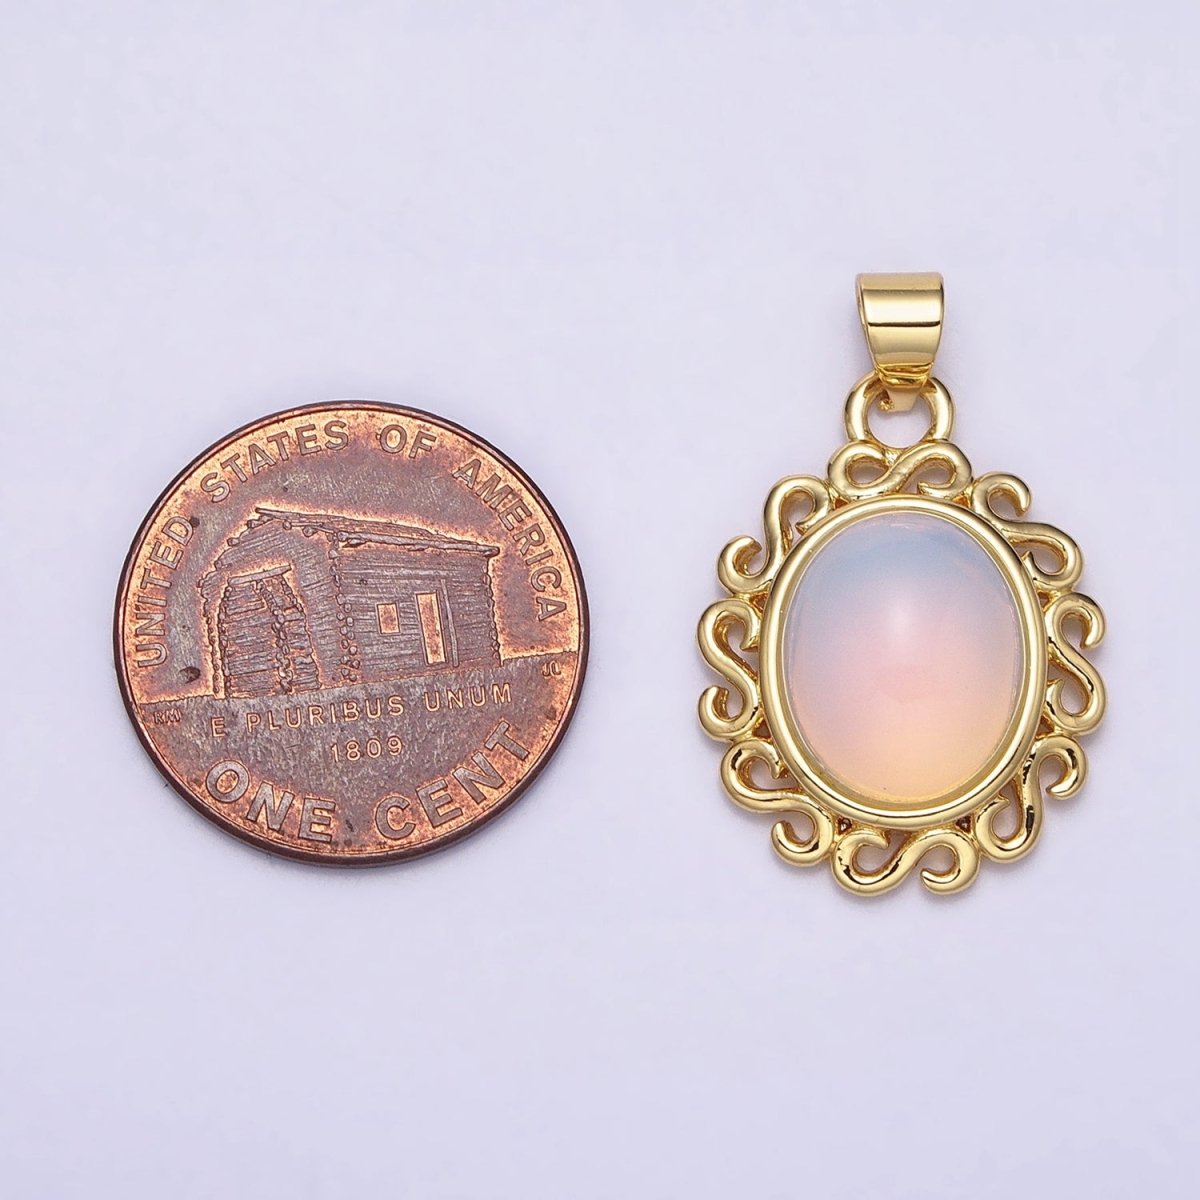 24k Gold Filled Rainbow Moonstone Charms, Gold Making Oval Moonstone Cabochon Pendant AA283 - DLUXCA